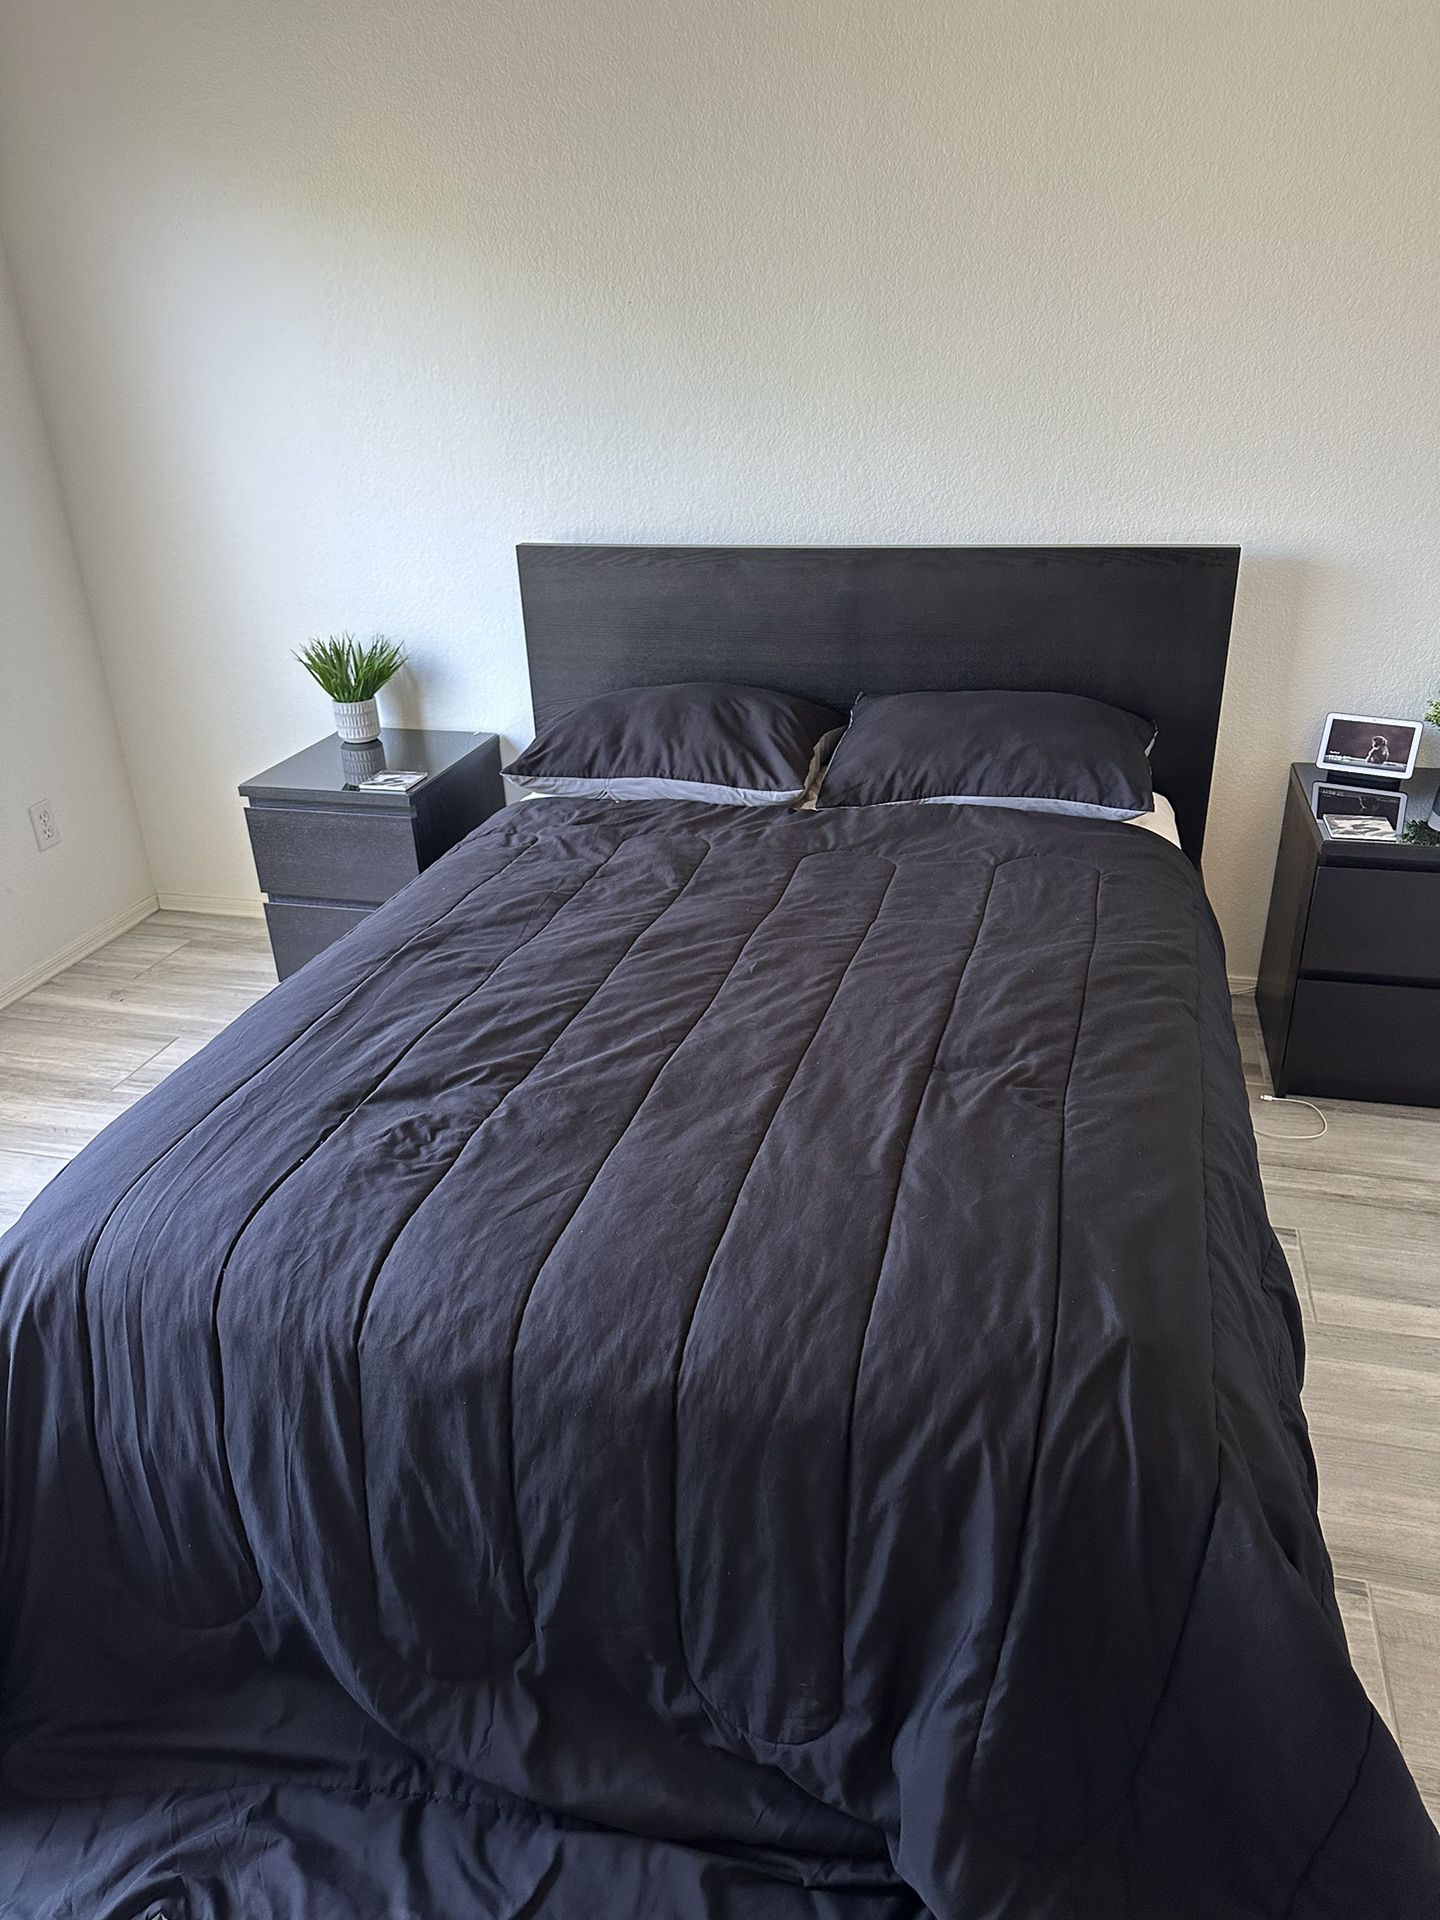 IKEA Malm Bed Frame & Nightstands